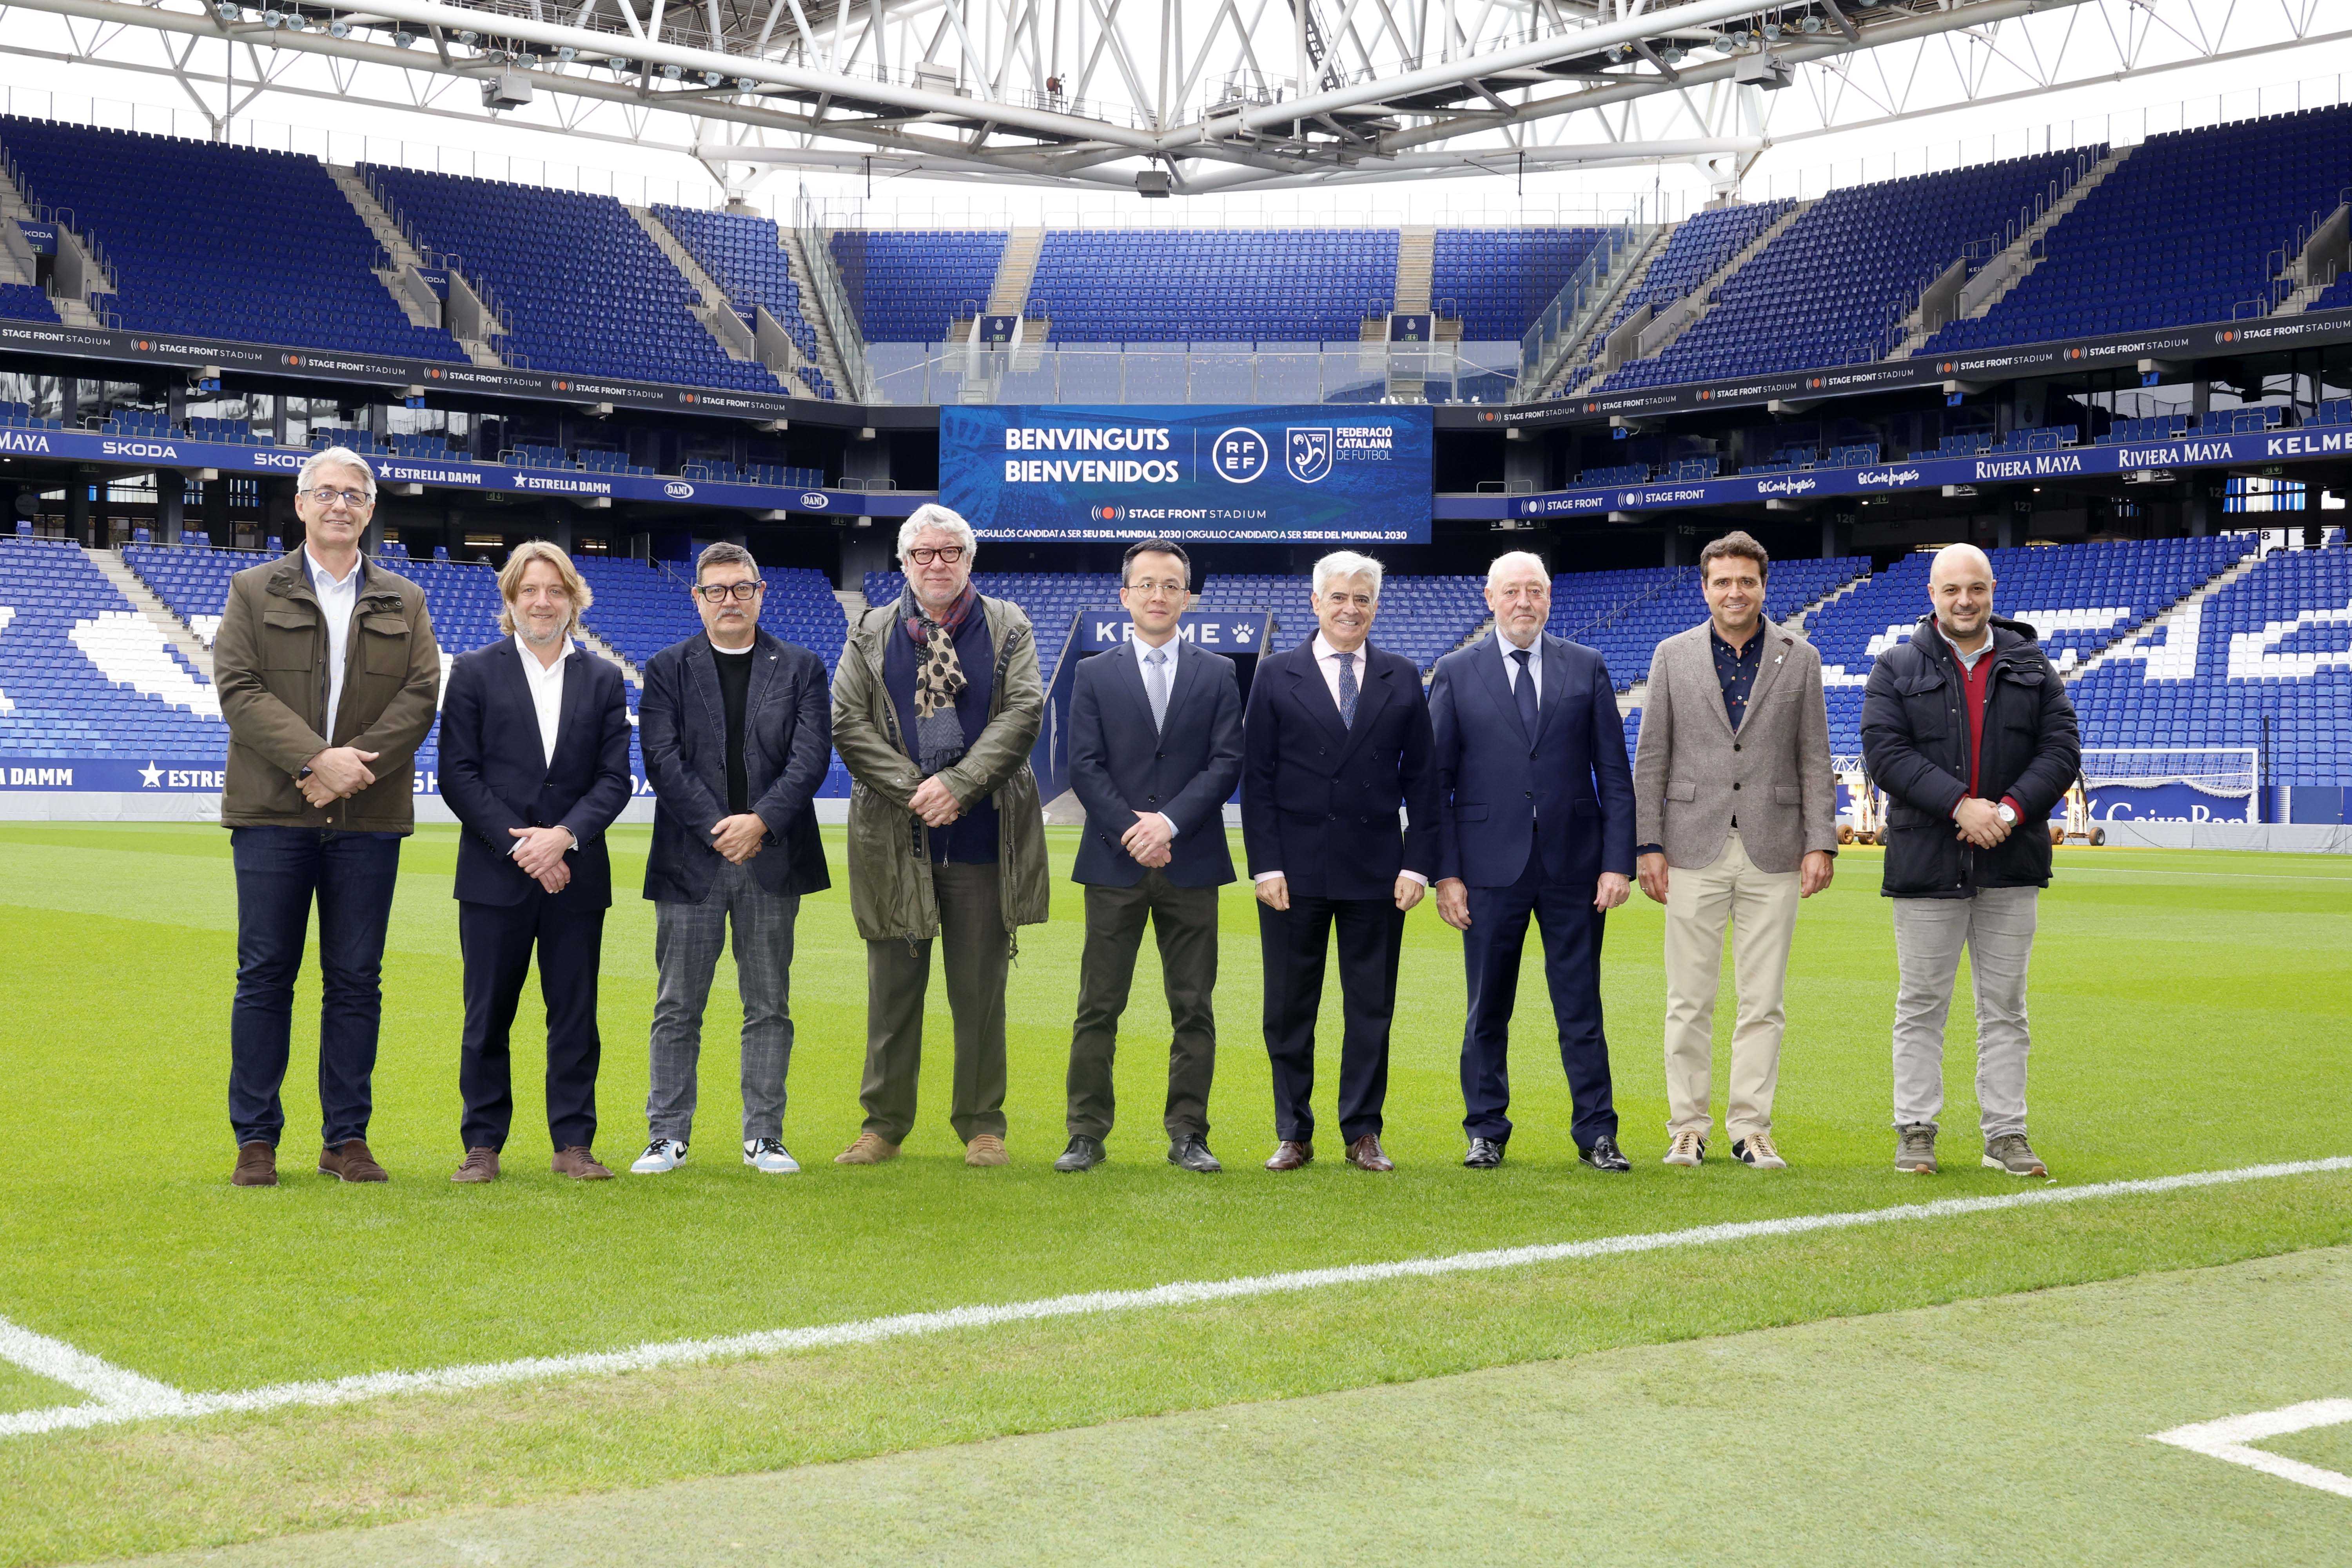 Institutional visit for 2030 World Cup candidacy